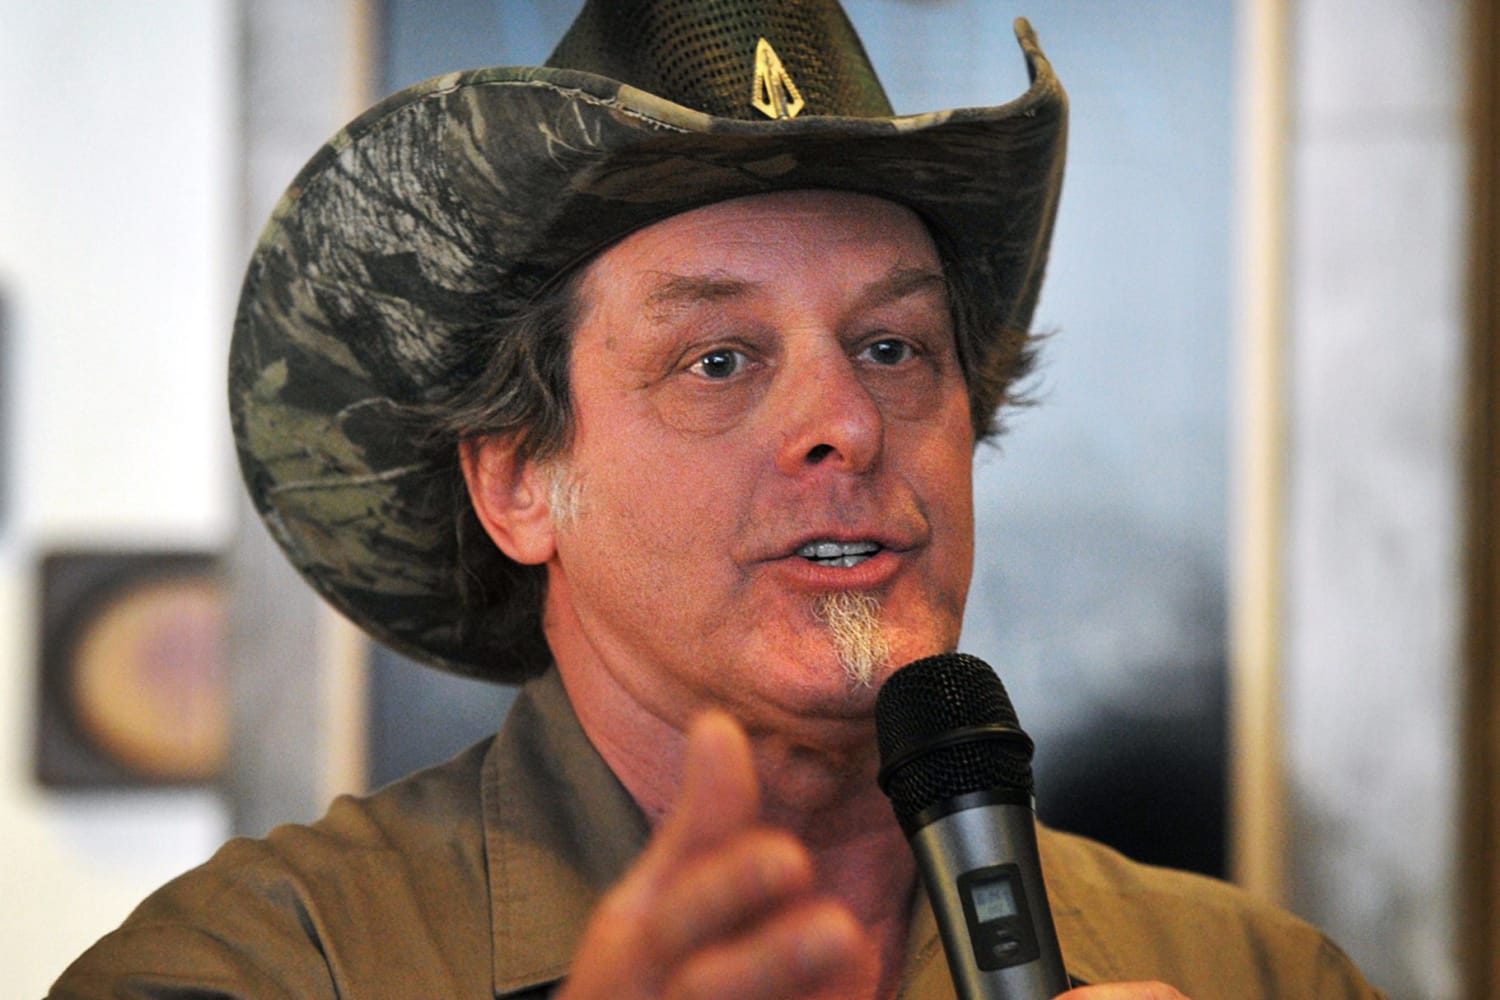 Ted Nugent, who once dismissed Covid-19, tells fans he's tested positive  for it